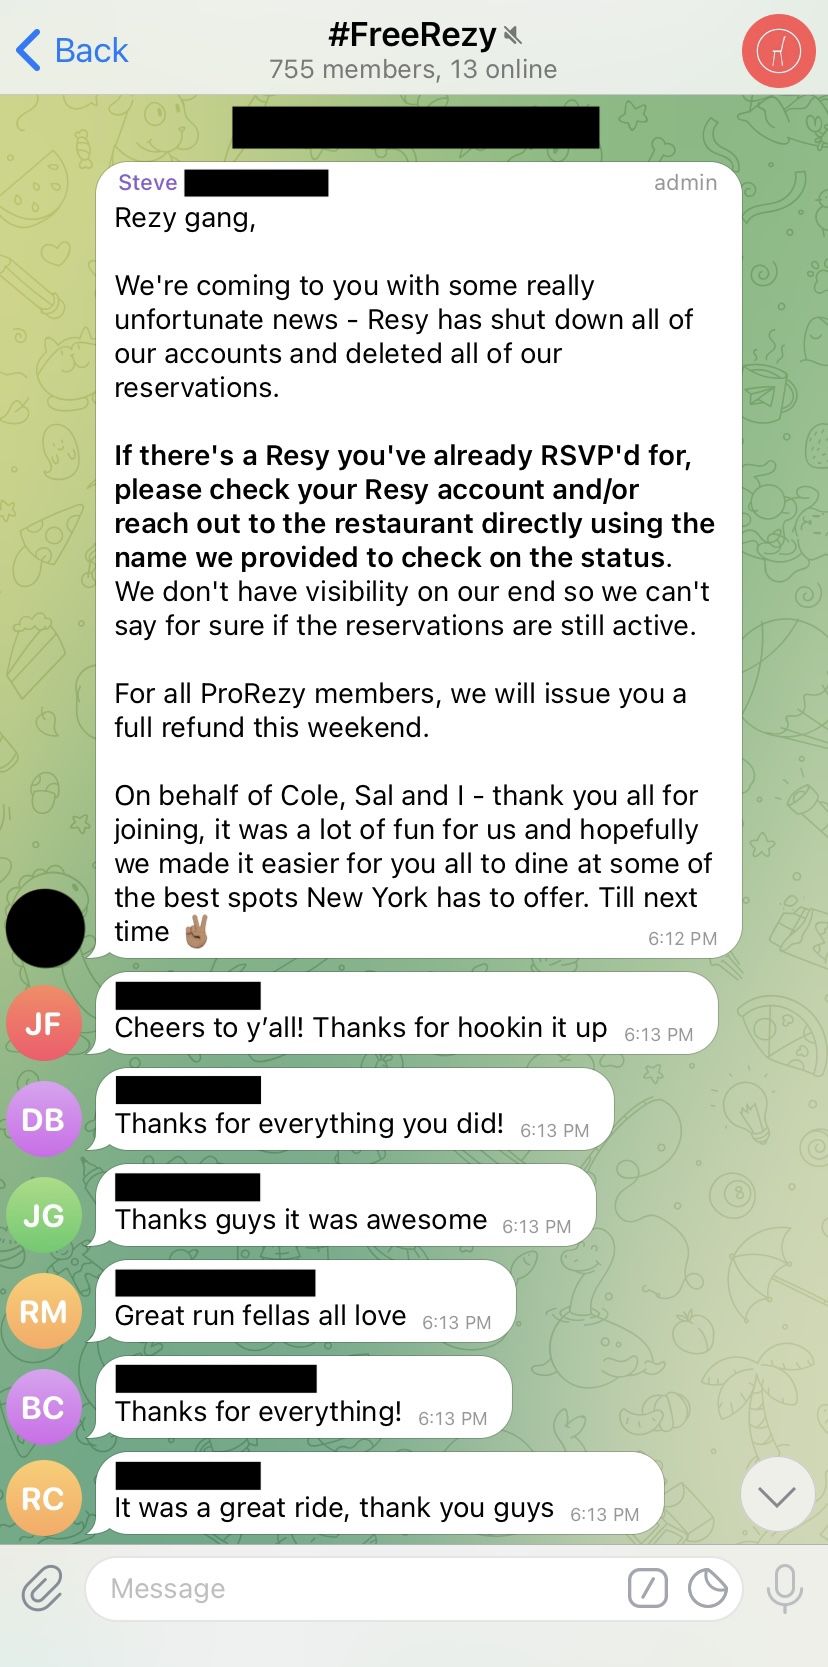 A screenshot from a message on Telegram, an encrypted messaging platform, announcing the end of an online group called #FreeRezy.